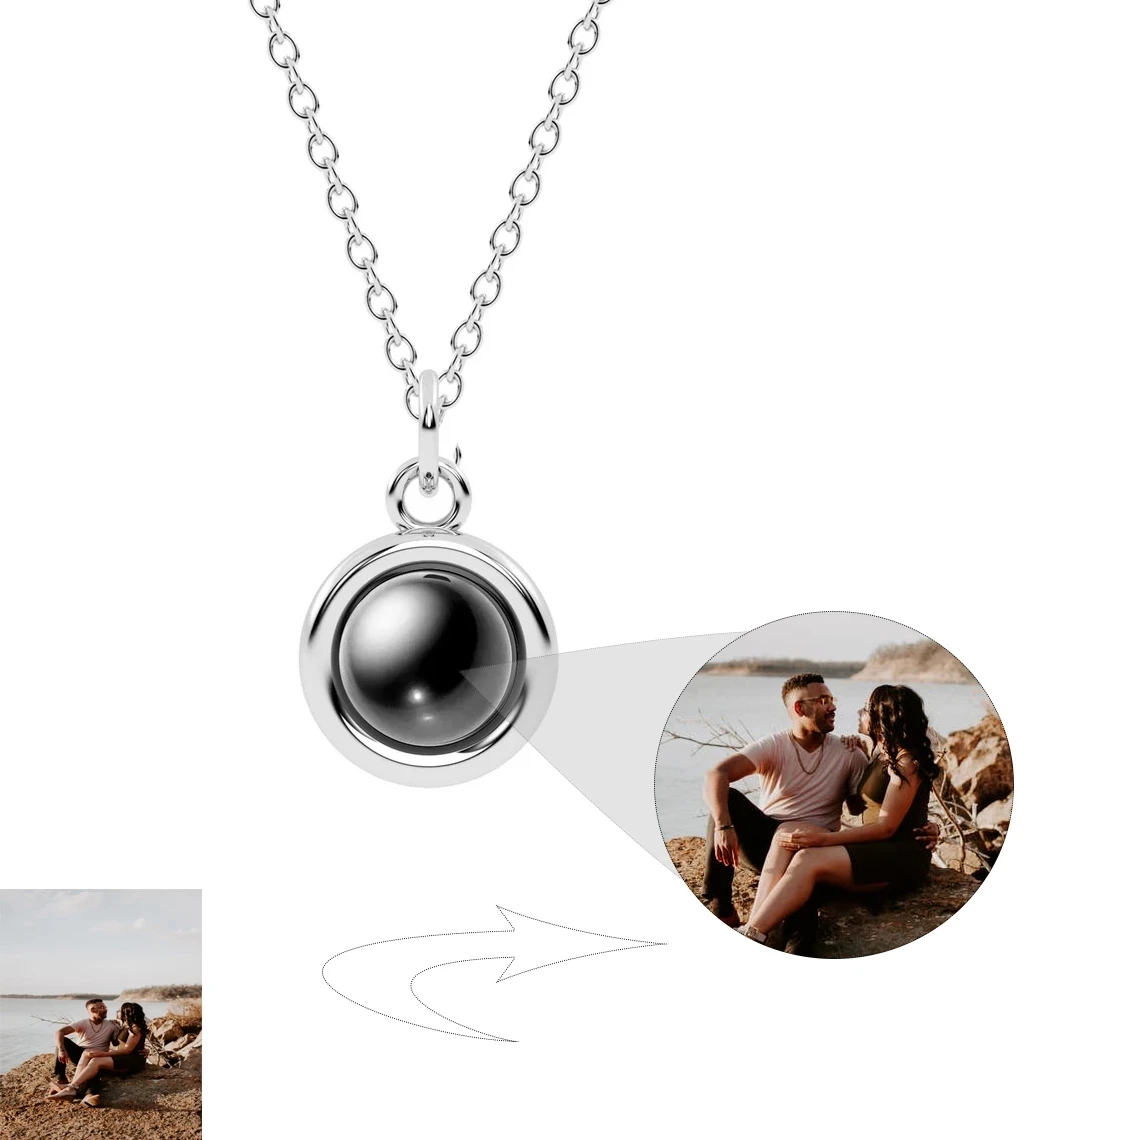 Dascusto New Custom Projection Photo Necklace For Women Personalized Picture Round Pendant Necklace Custom Jewelry Memorial Gift